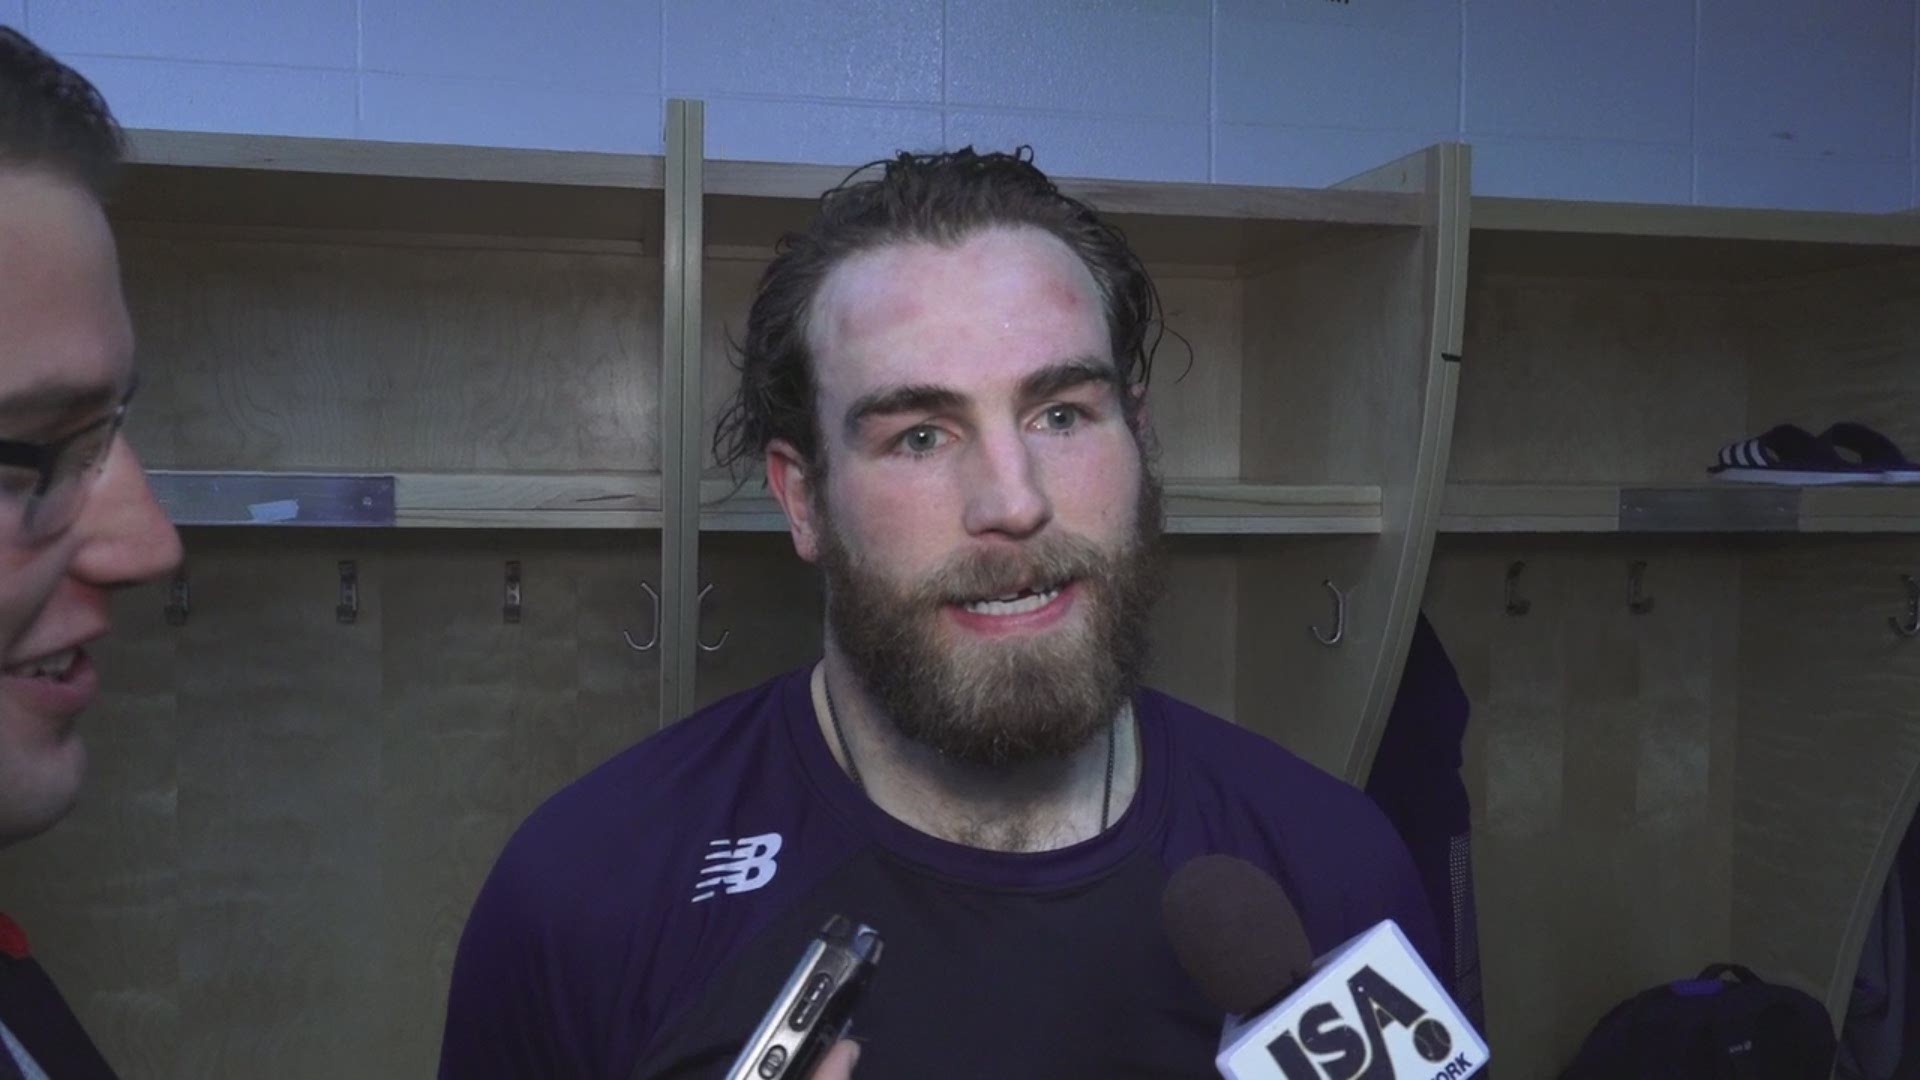 Ryan O'Reilly scored in the Blues' 3-2 overtime win against the Calgary Flames. He talked after the team's 7th win in a row. Courtesy: Blue Note Productions